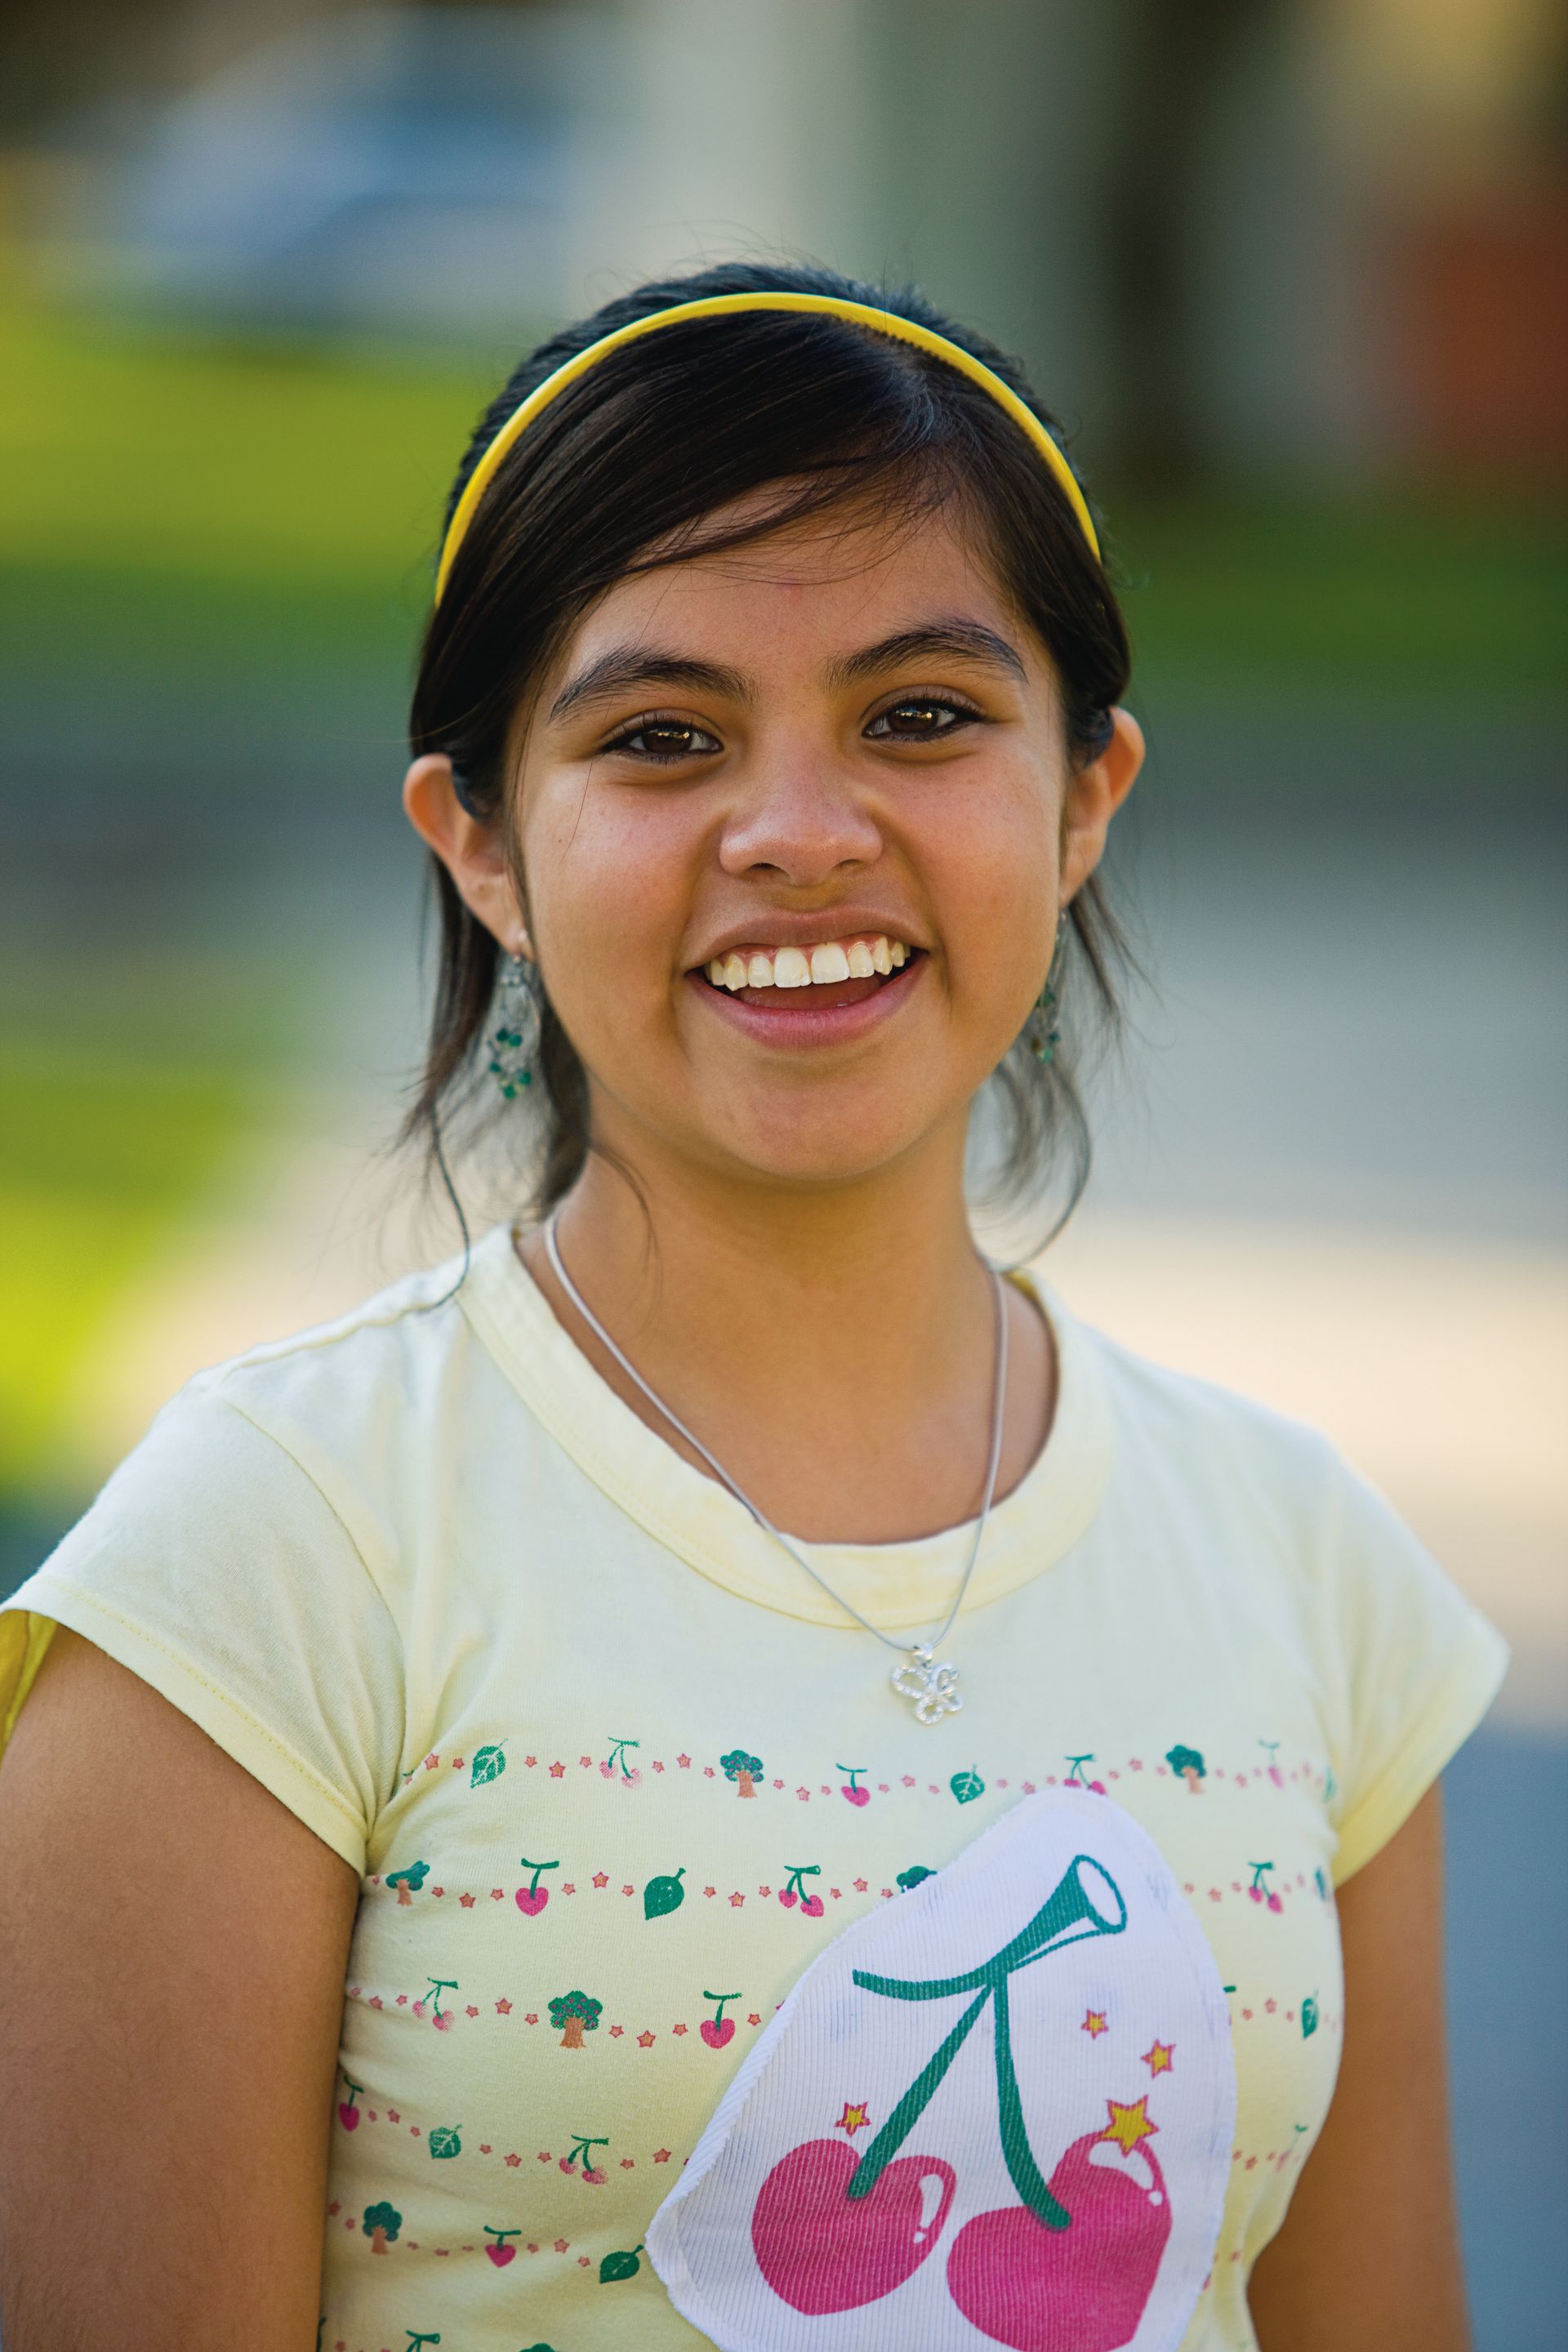 A portrait of a young woman in Mexico.